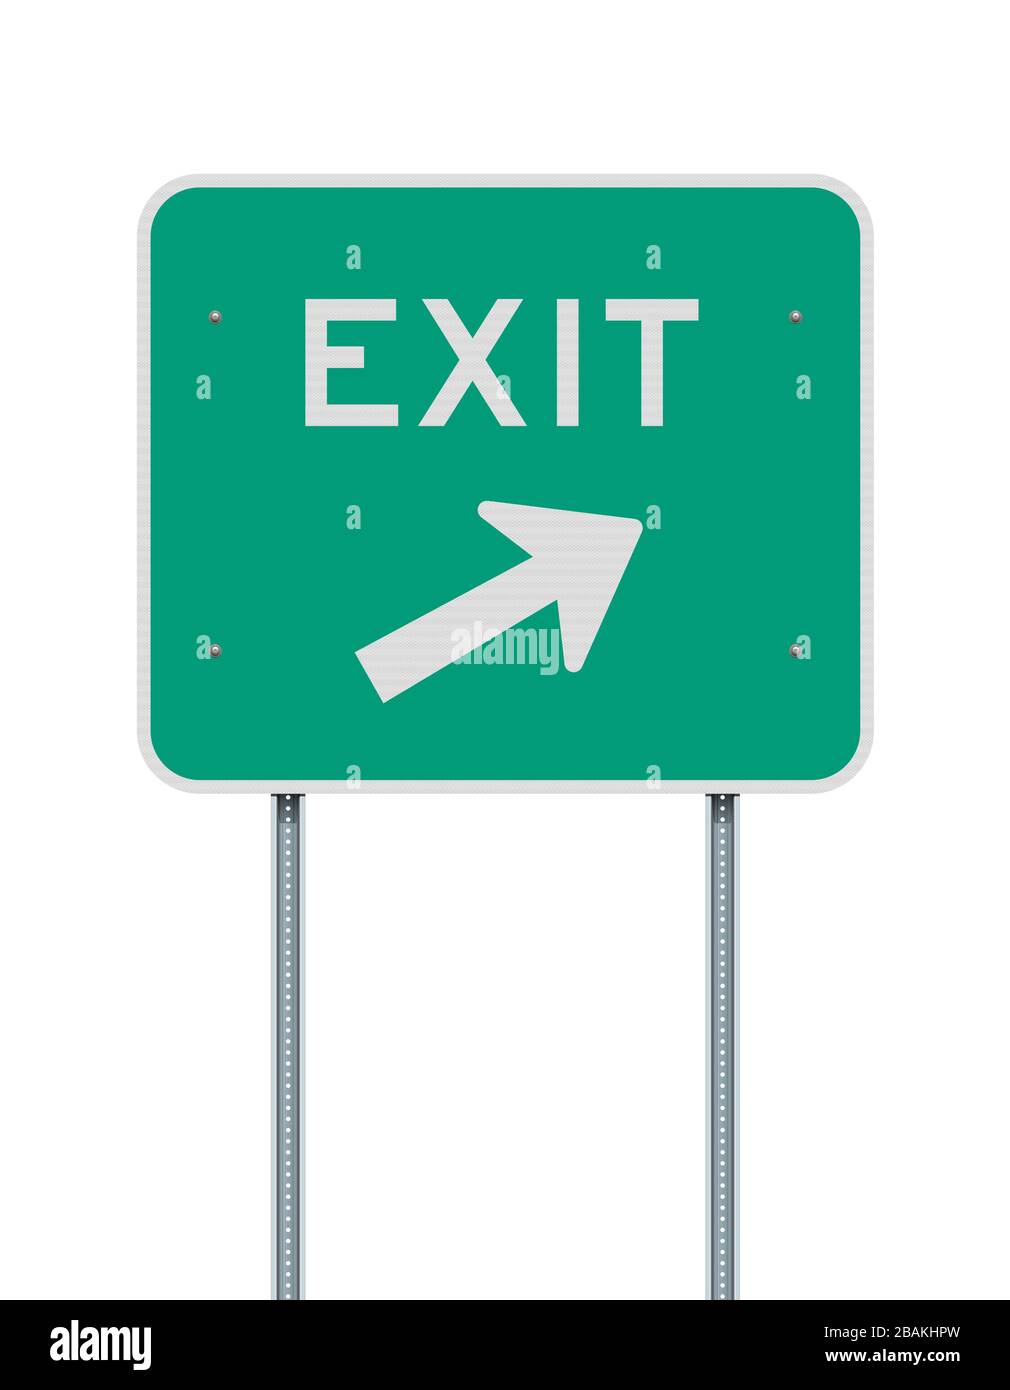 Vector illustration of the Exit direction arrow to the right green road sign on metallic posts Stock Vector